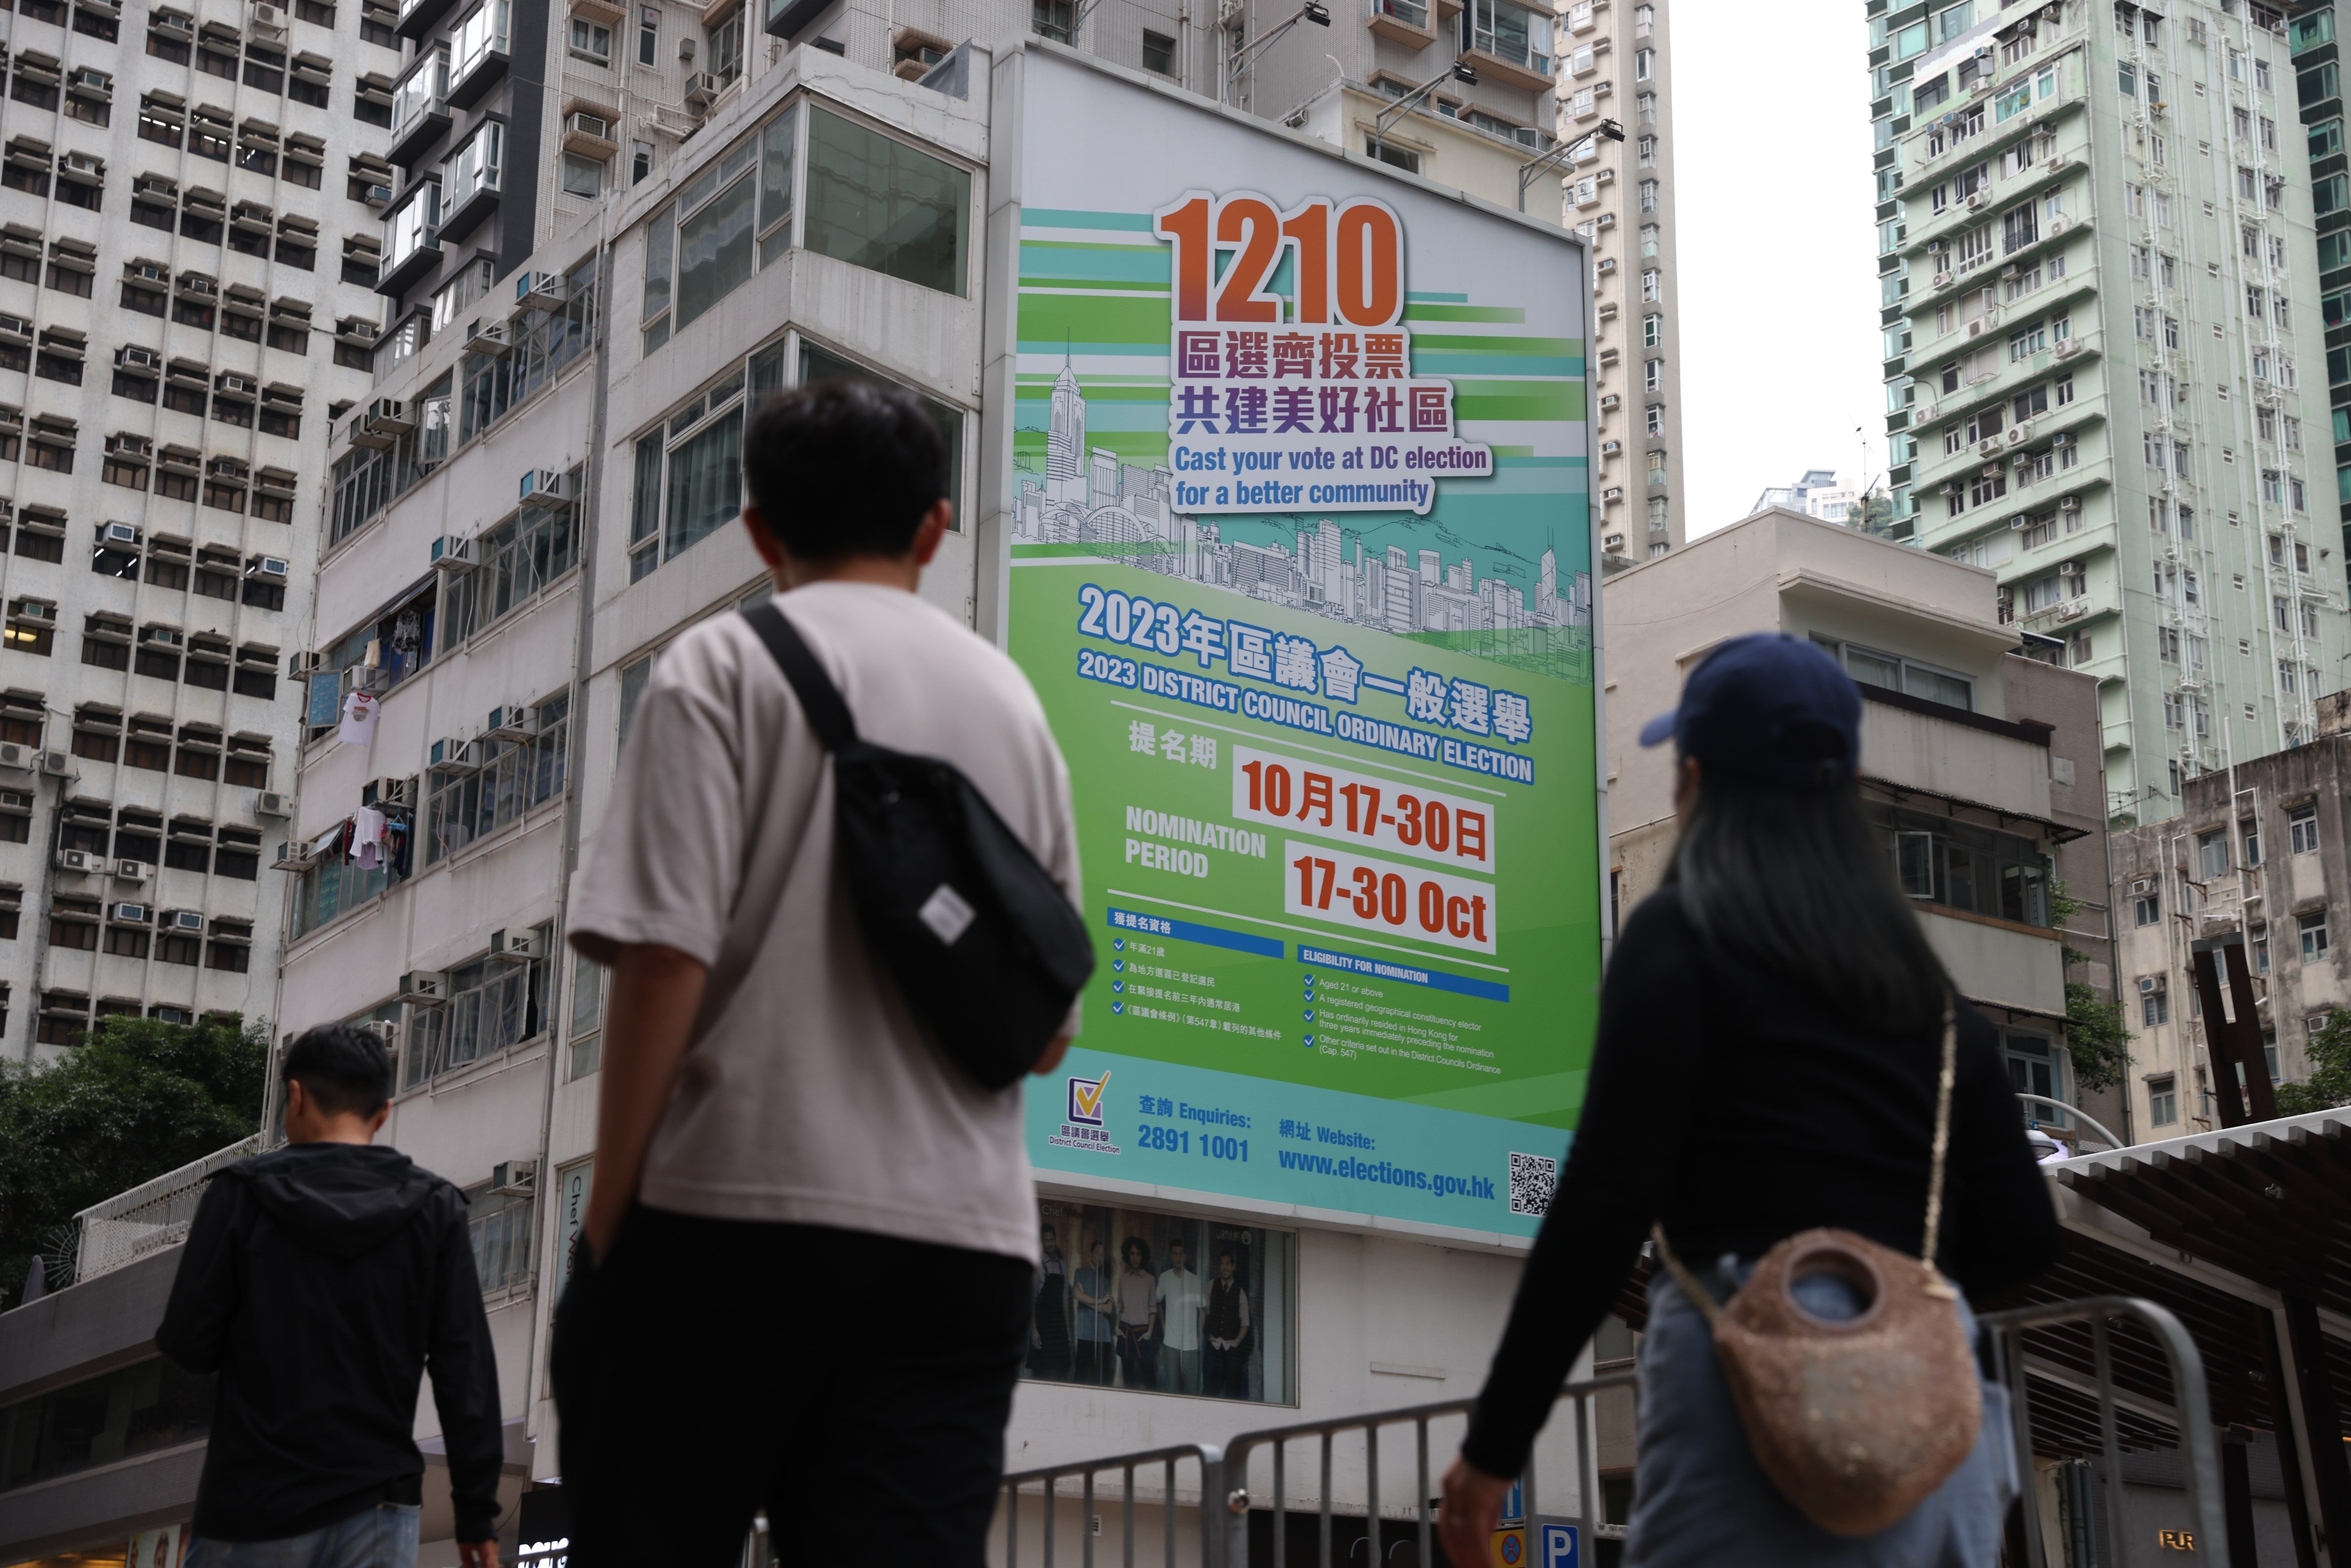 A poster for the 2023 district council election. Each councillor gets HK$49,512 a month for operational fees and a one-off subsidy of HK$120,000 to open an office. Photo: Yik Yeung-man